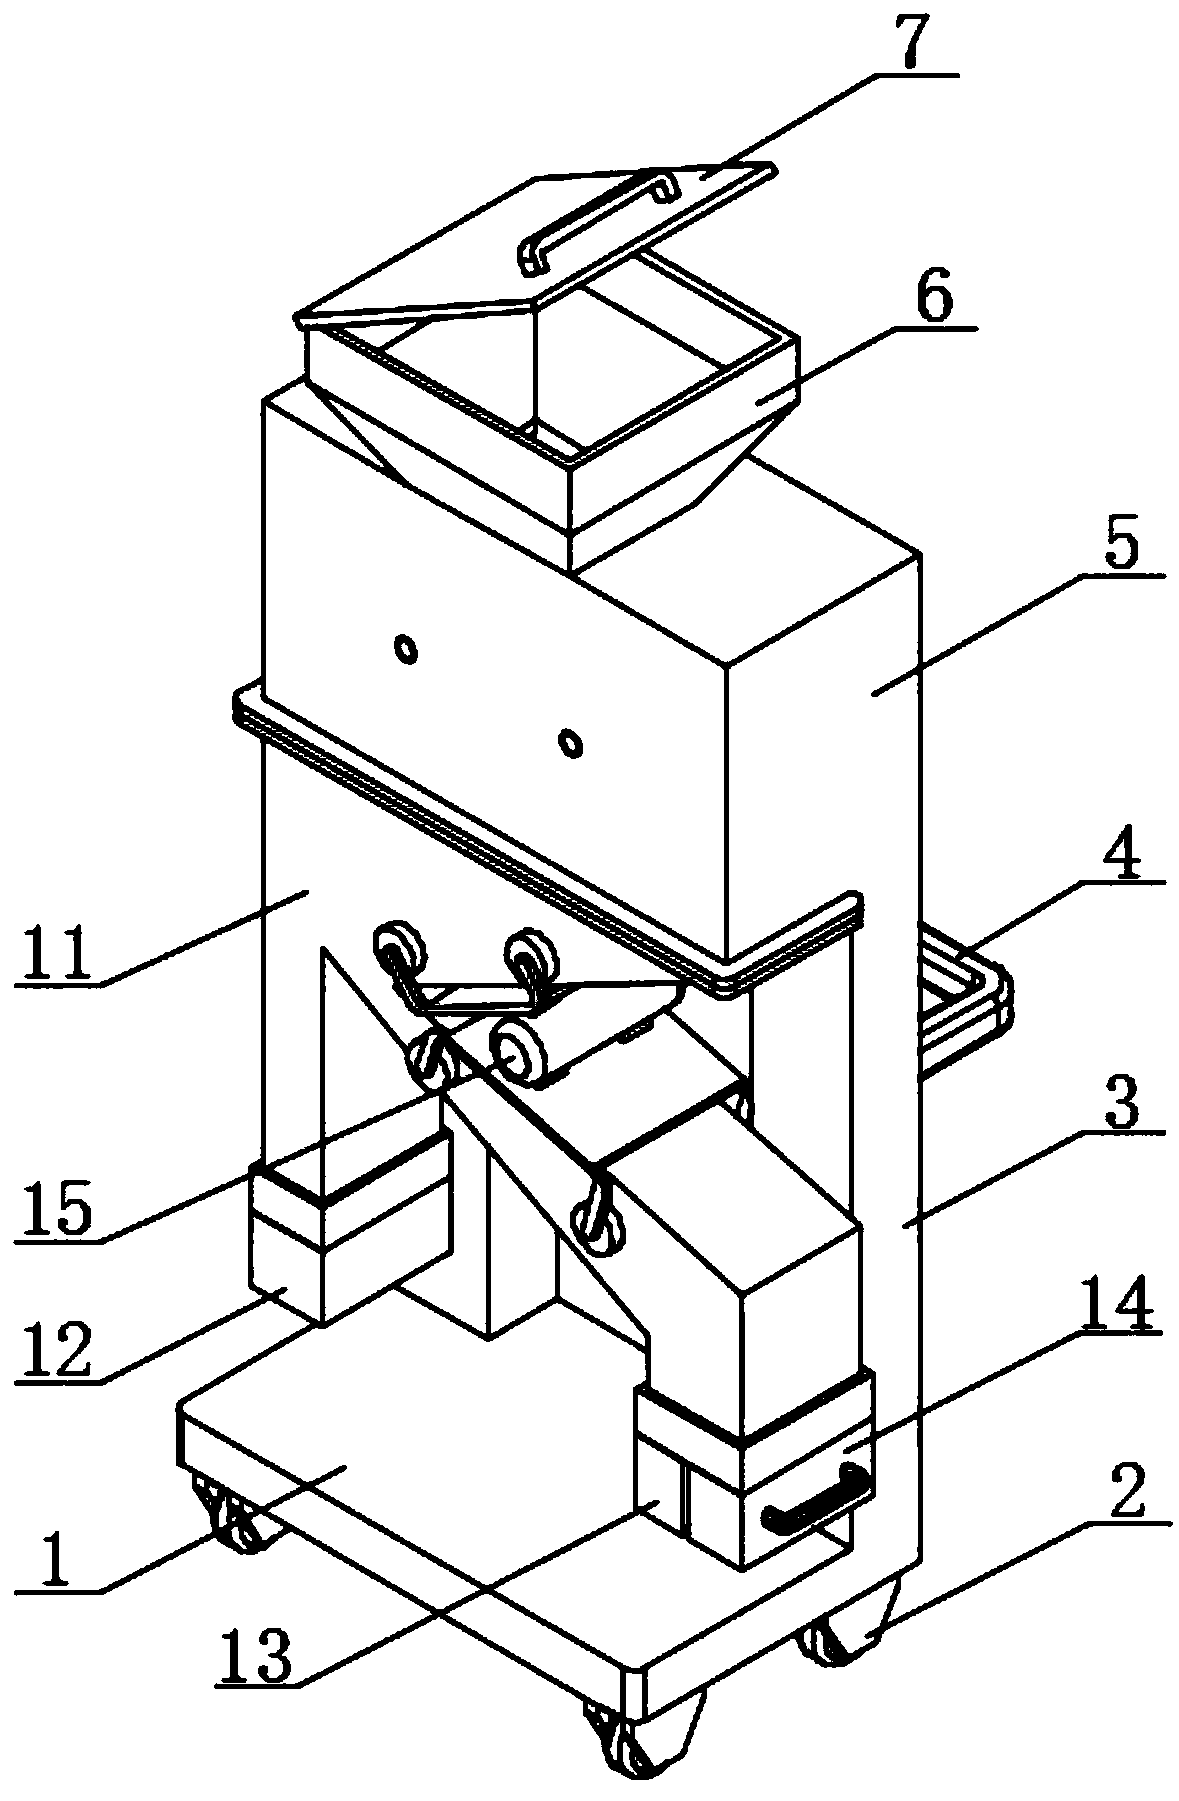 Device for separating and filtering pollen of fruits and vegetables